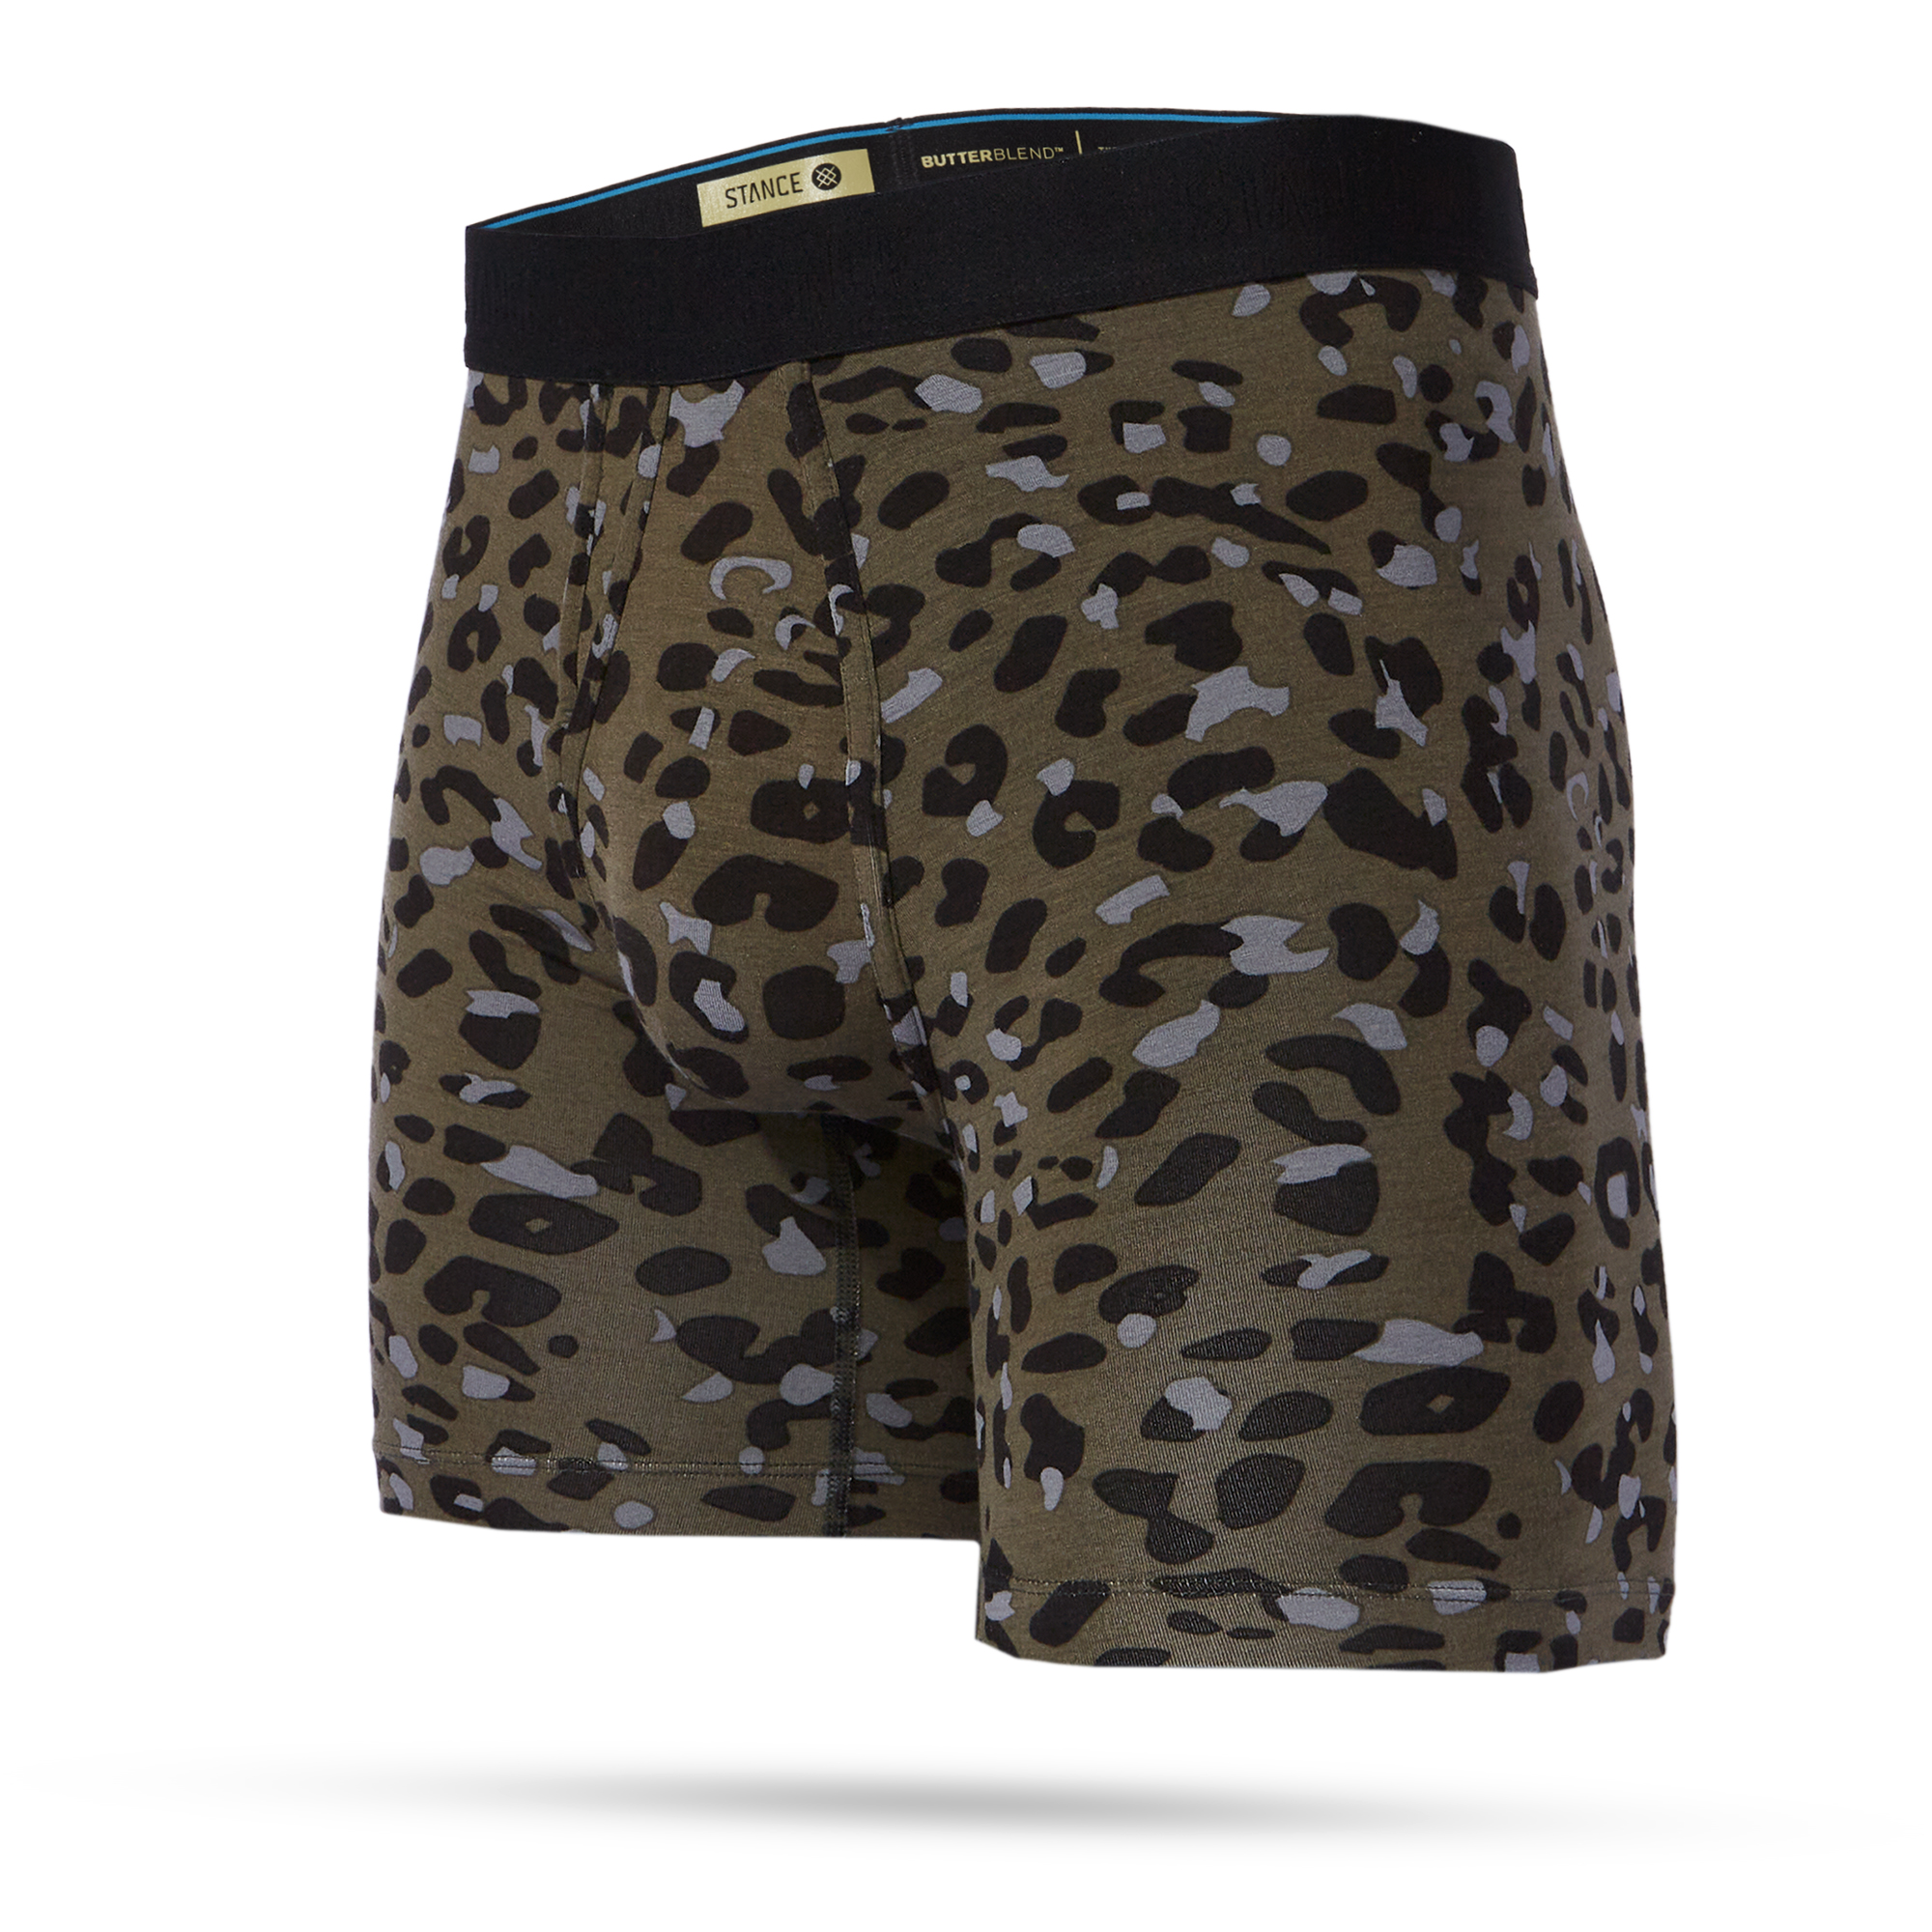 Stance Reels Butter Blend Boxer Brief With Wholester™ - Khaki - MODA3